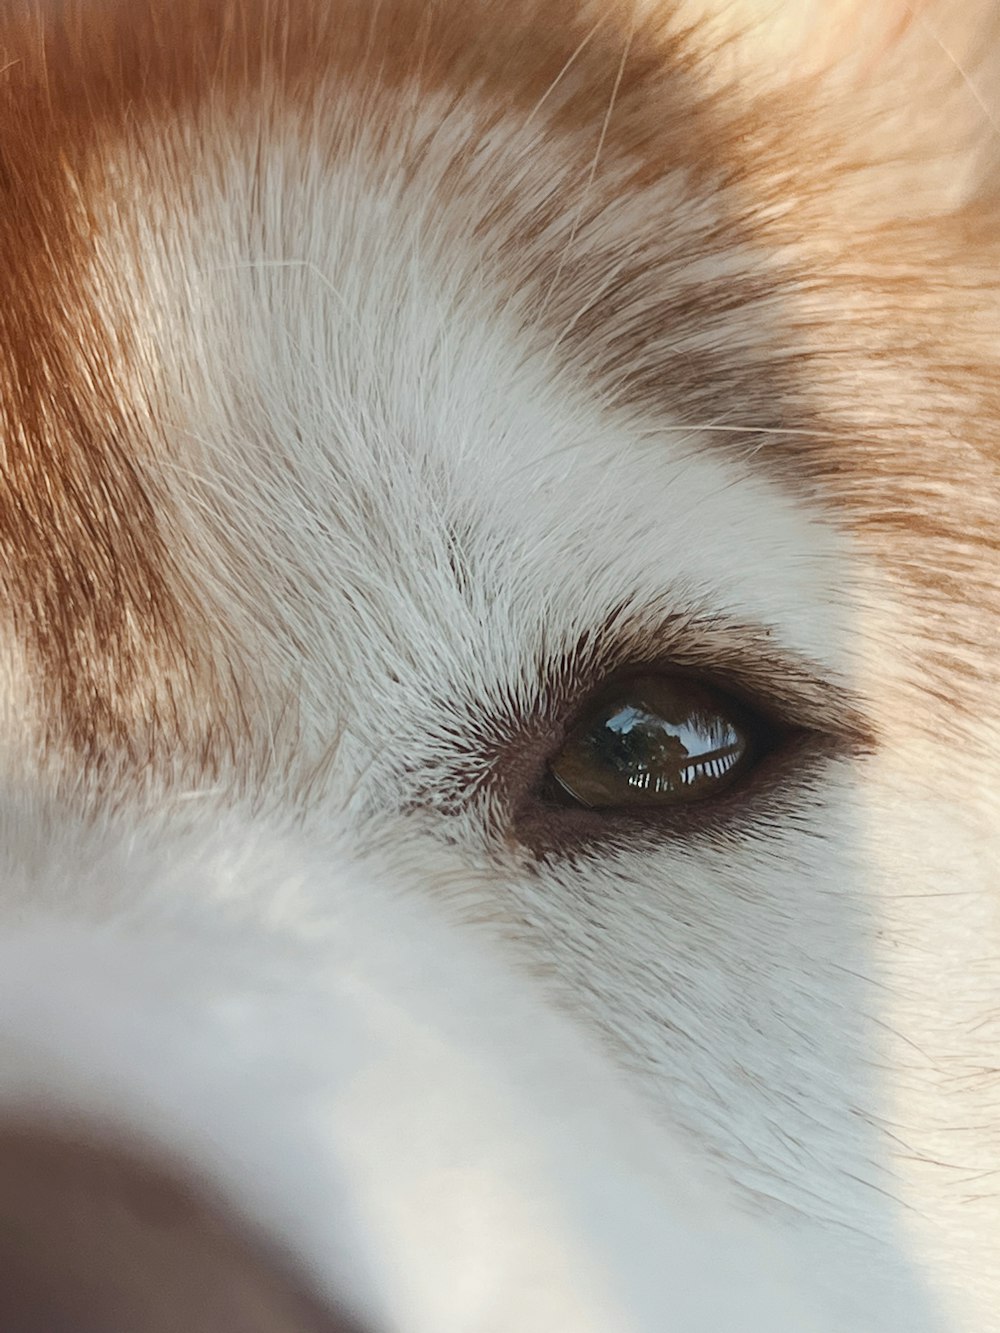 a close up of a dog's eye with a blurry background